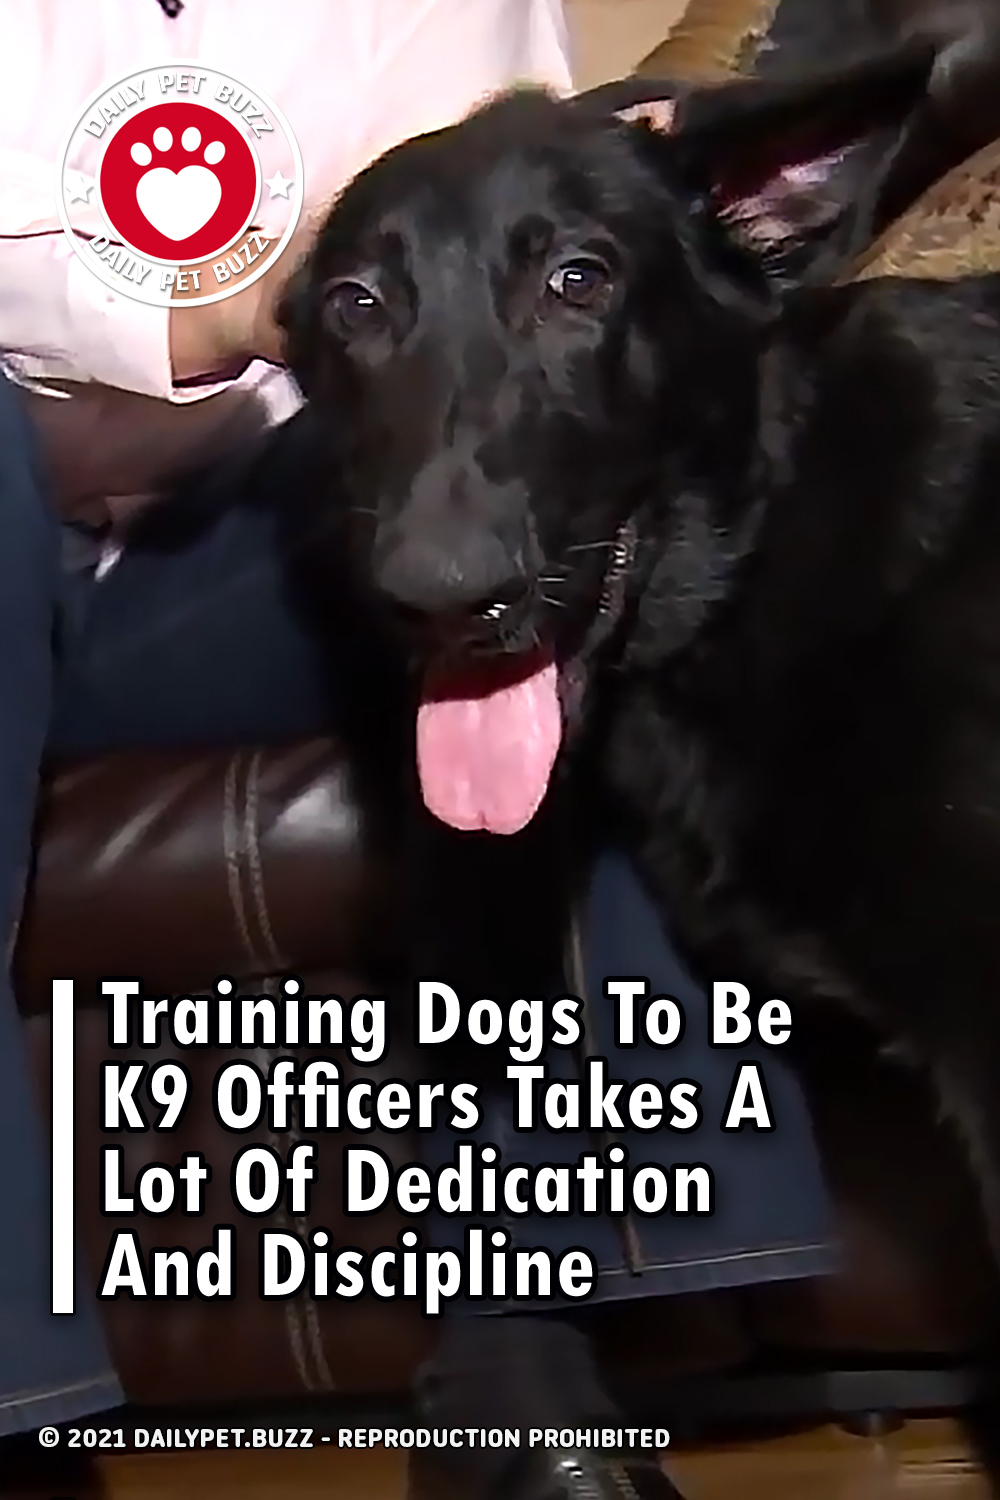 Training Dogs To Be K9 Officers Takes A Lot Of Dedication And Discipline